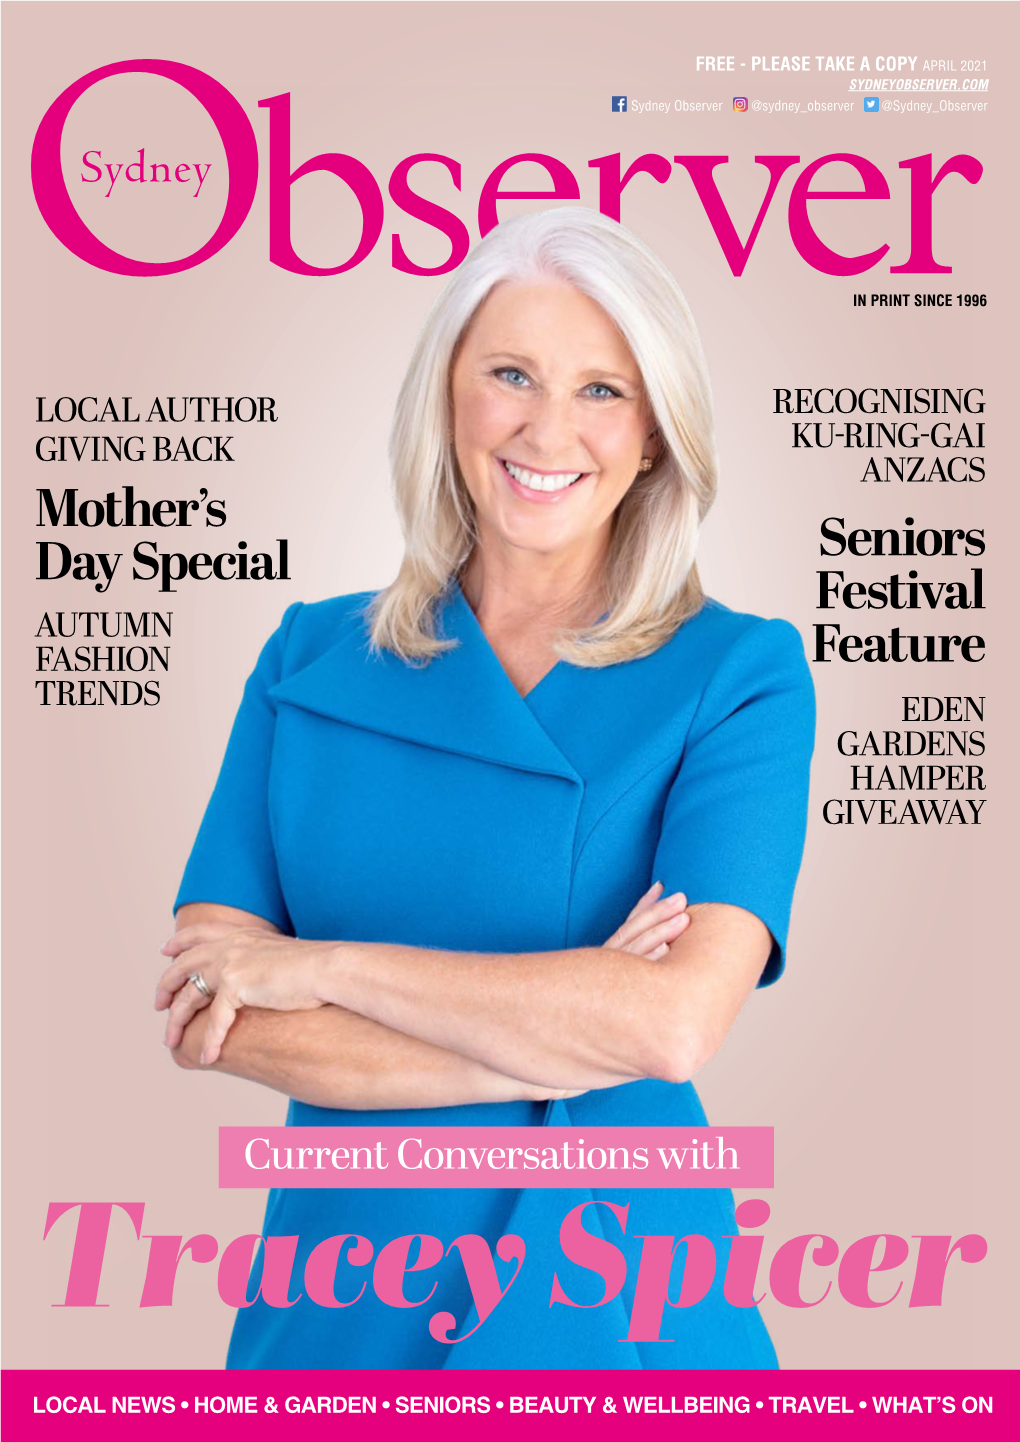 Sydney Observer Magazine, Its Publisher and Areas of Hornsby, Lane Cove and Willoughby